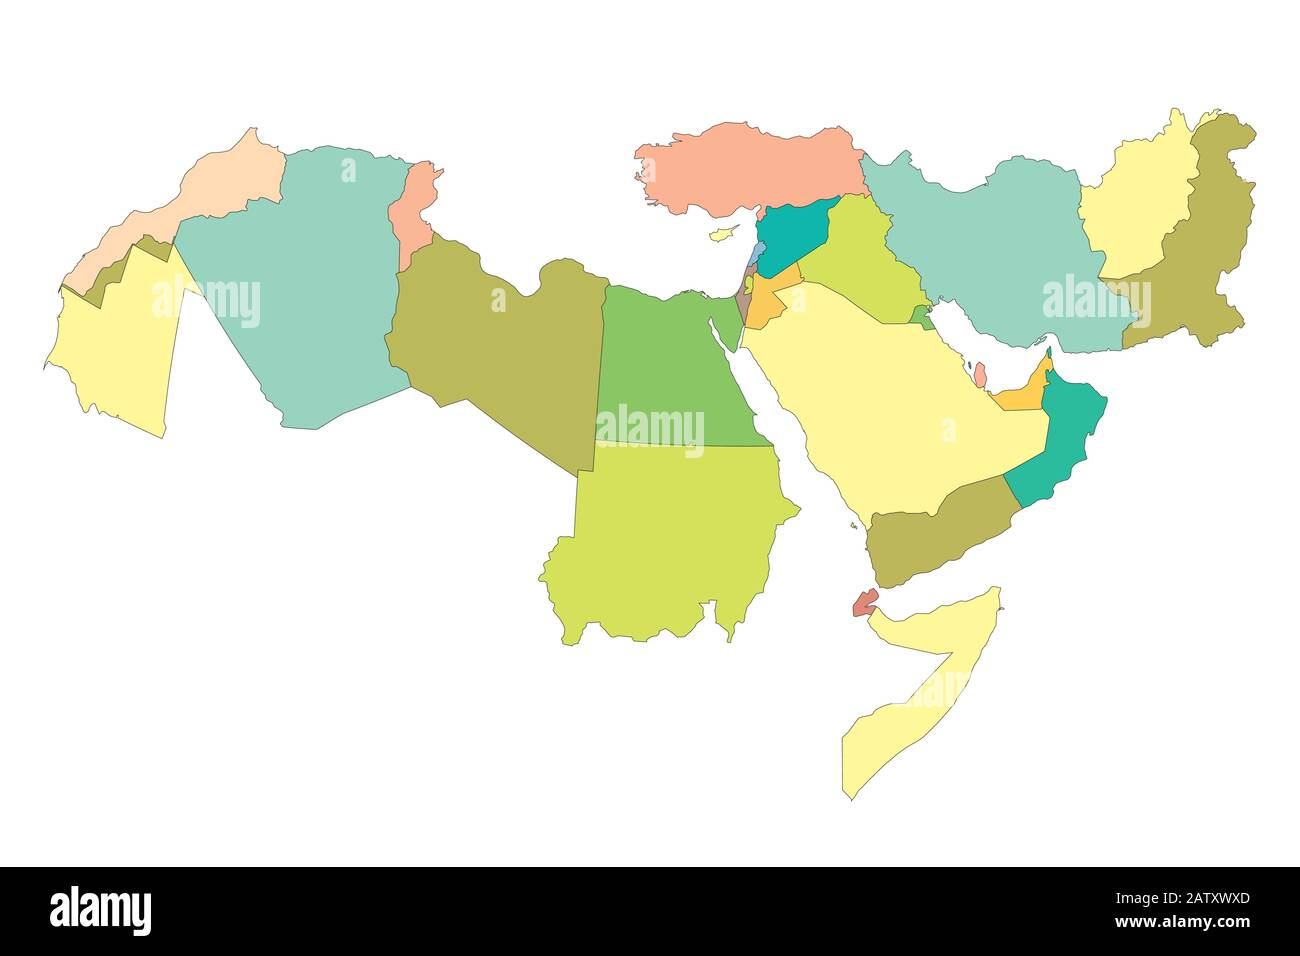 Map Of Greater Middle East With Borders Of Countries Stock Vector